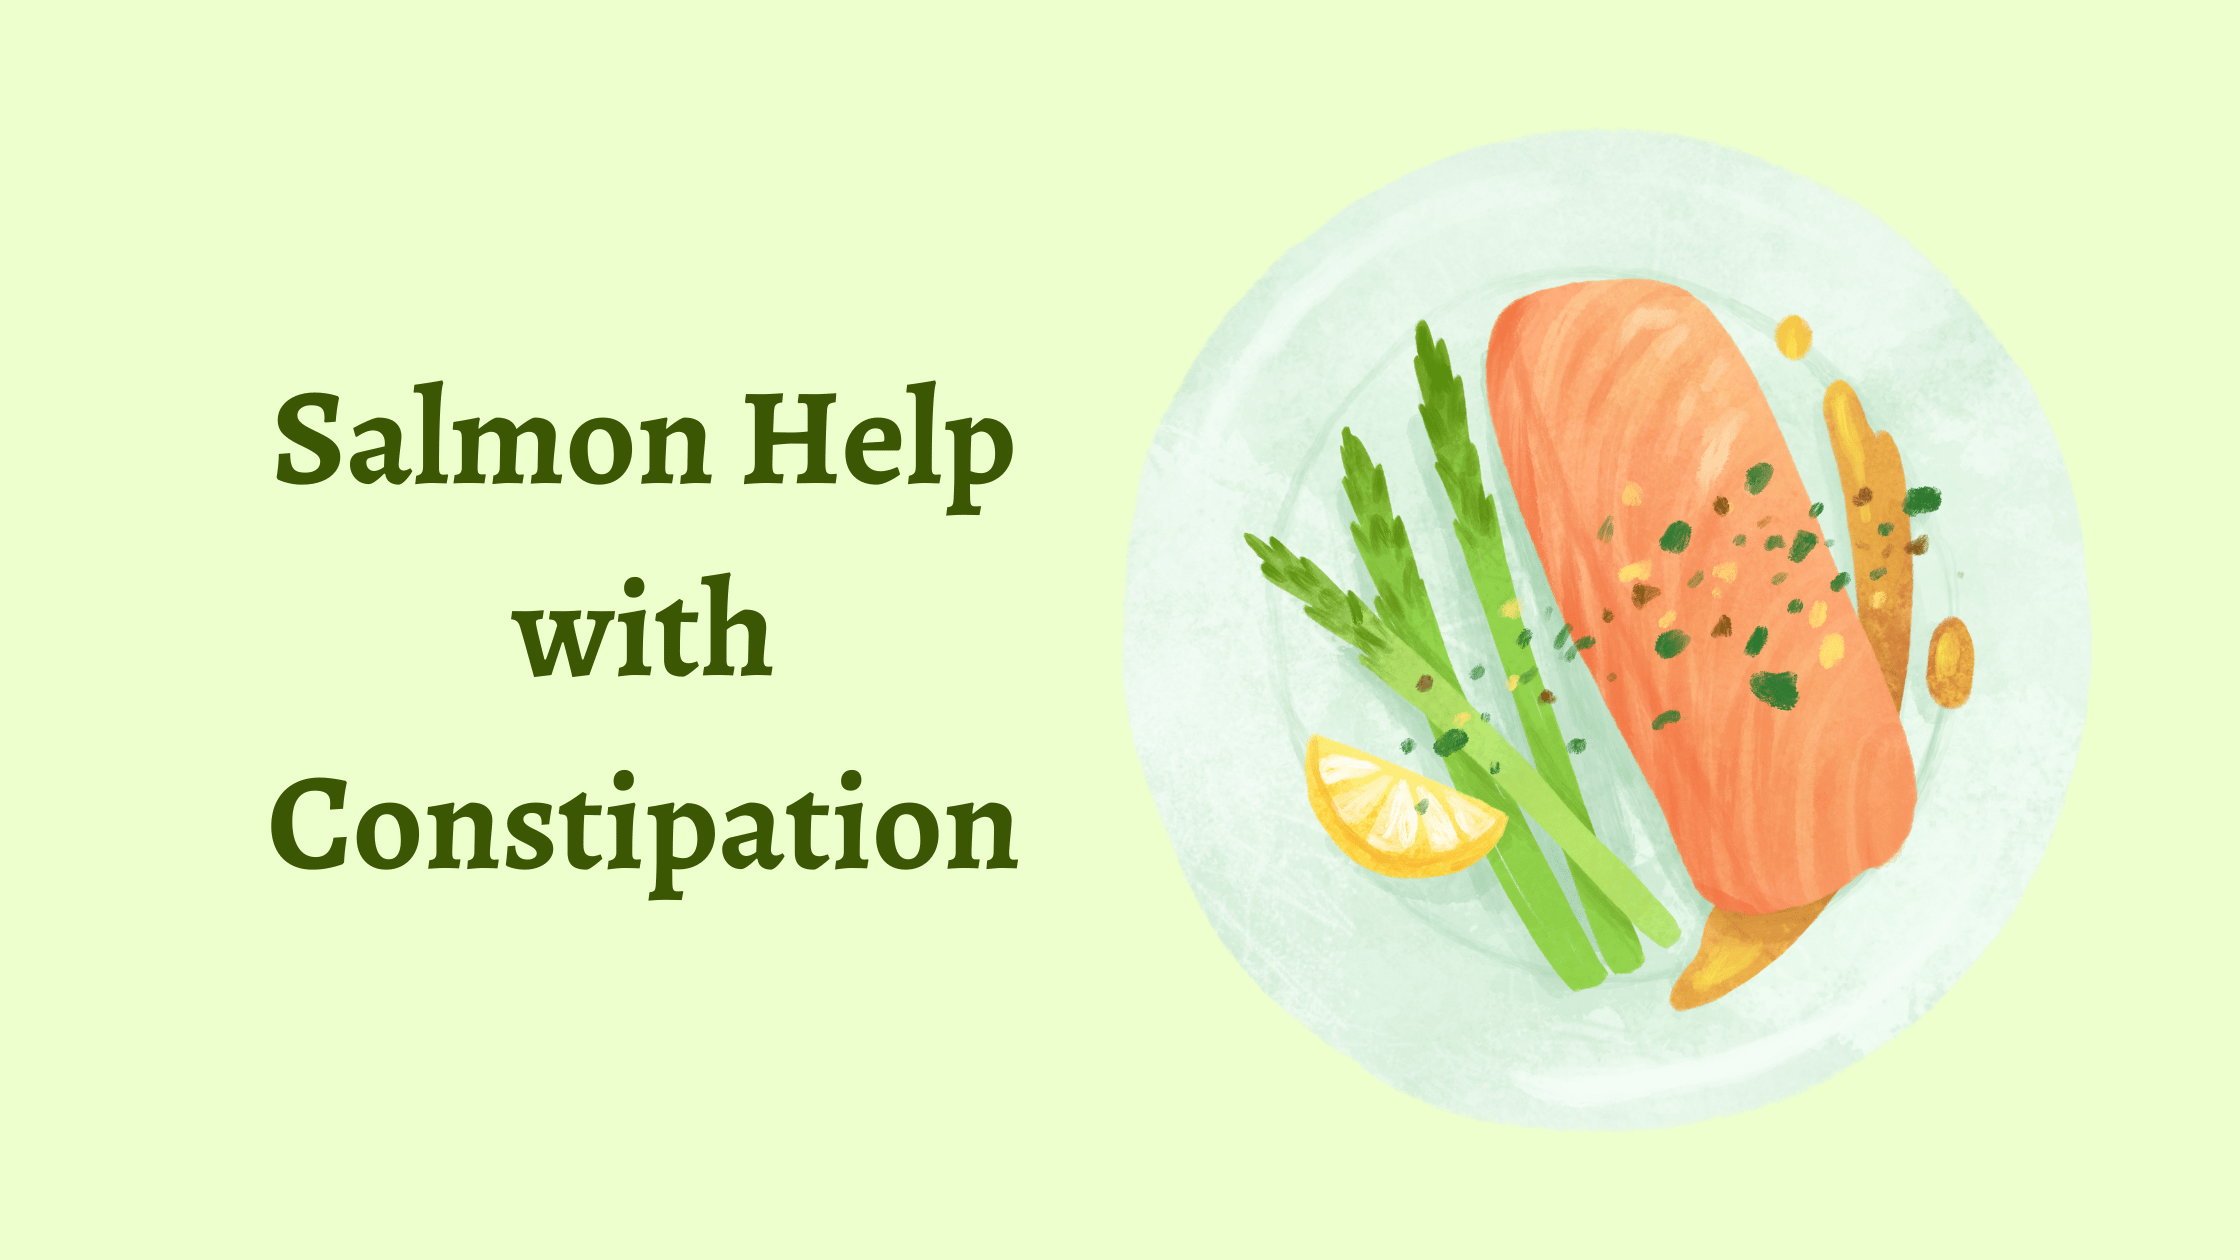 Salmon Help with Constipation